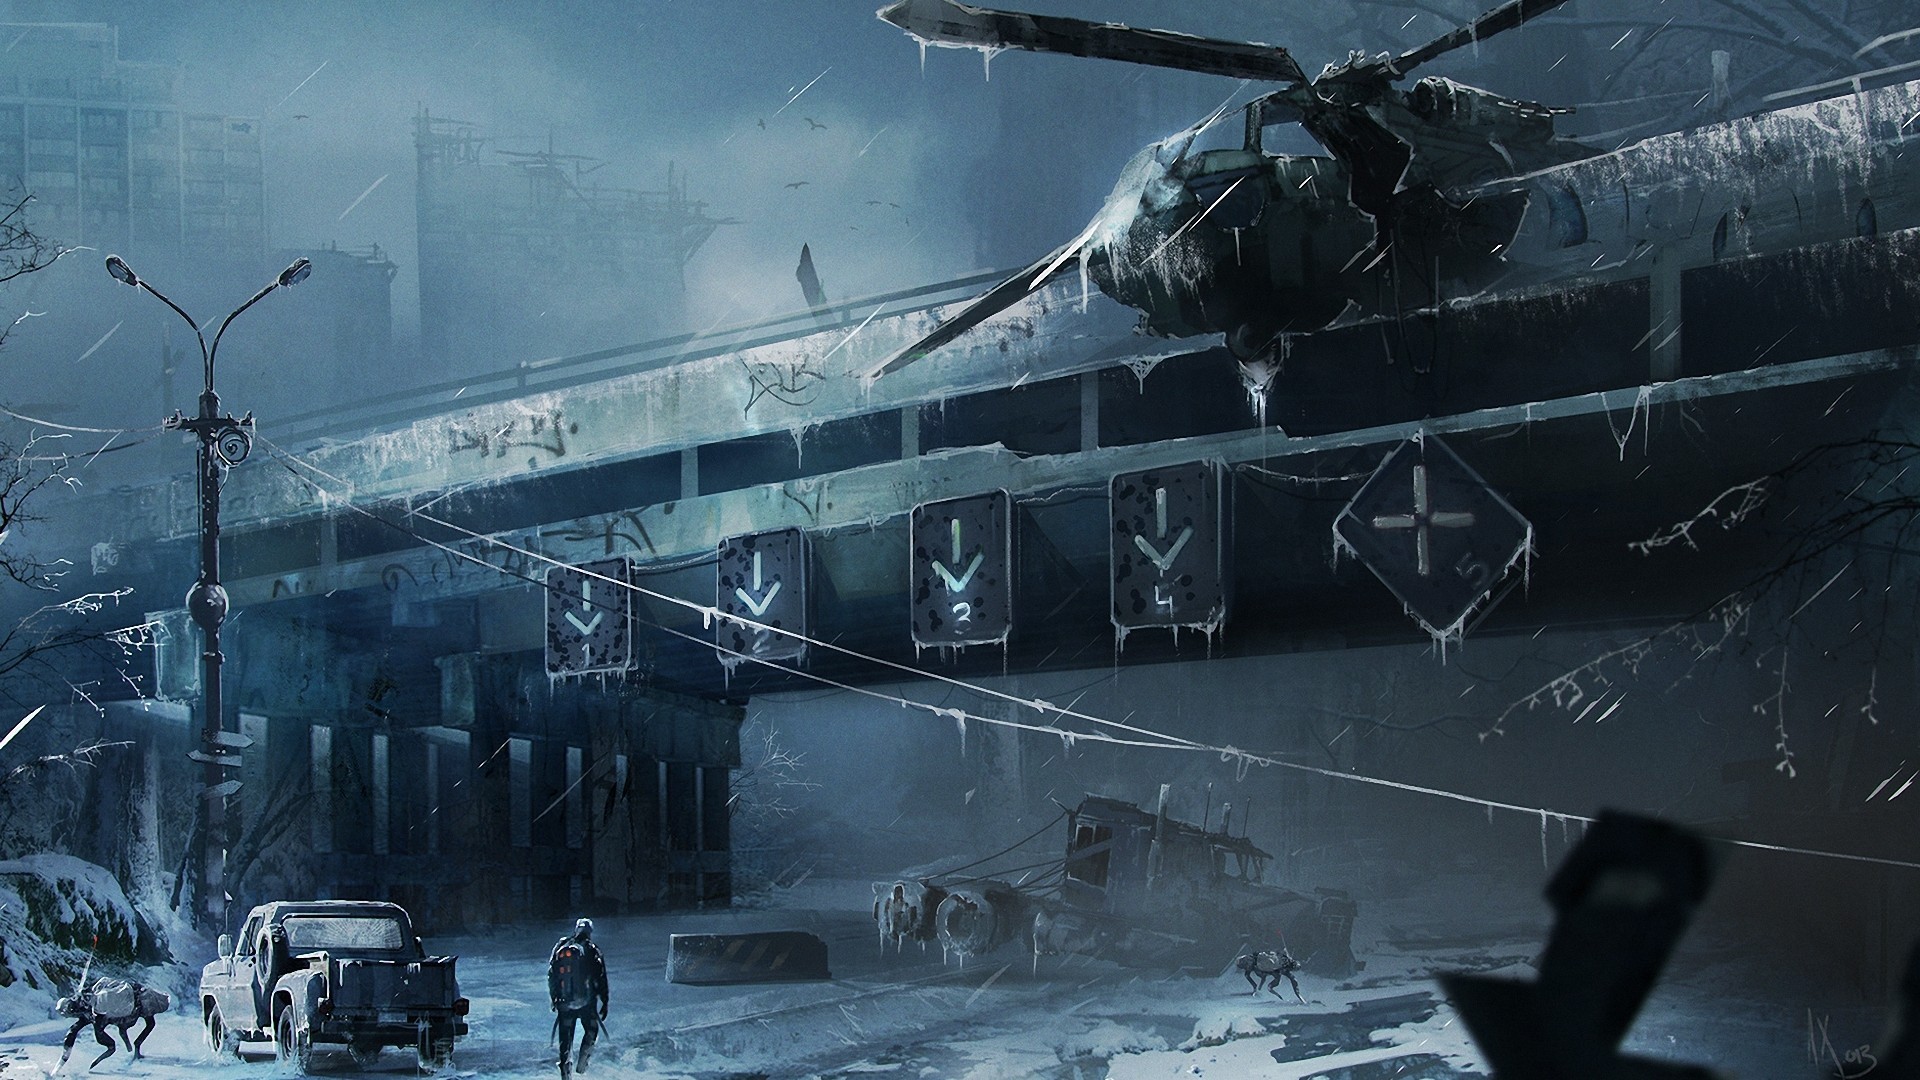 General 1920x1080 apocalyptic futuristic ice wreck artwork helicopters winter cold snow ruins vehicle